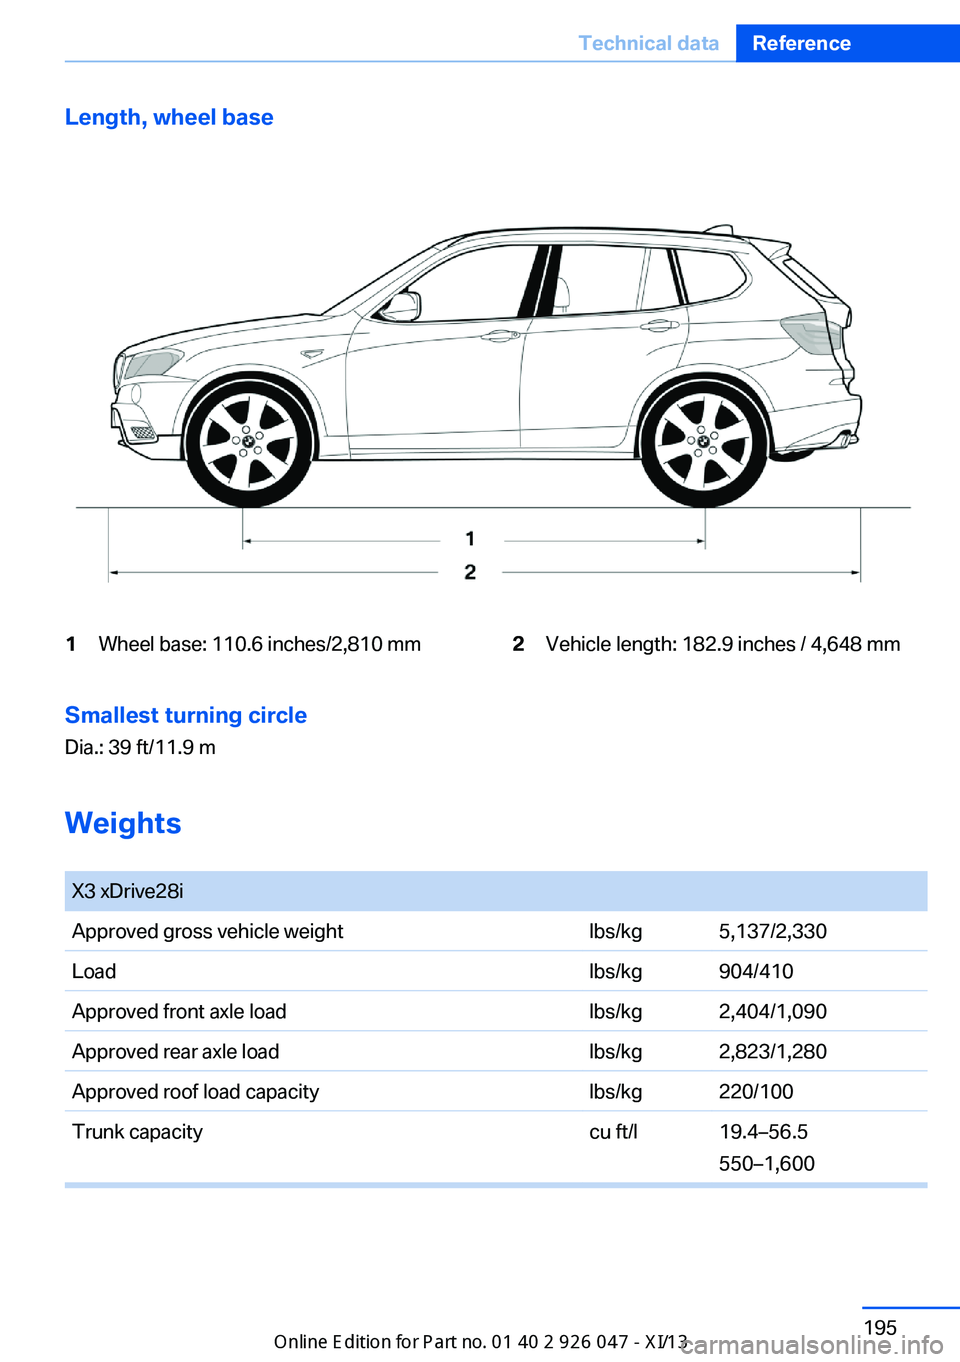 BMW X3 2013 F25 Owners Manual Length, wheel base1Wheel base: 110.6 inches/2,810 mm2Vehicle length: 182.9 inches / 4,648 mmSmallest turning circle
Dia.: 39 ft/11.9 m
Weights
 
X3 xDrive28iApproved gross vehicle weightlbs/kg5,137/2,